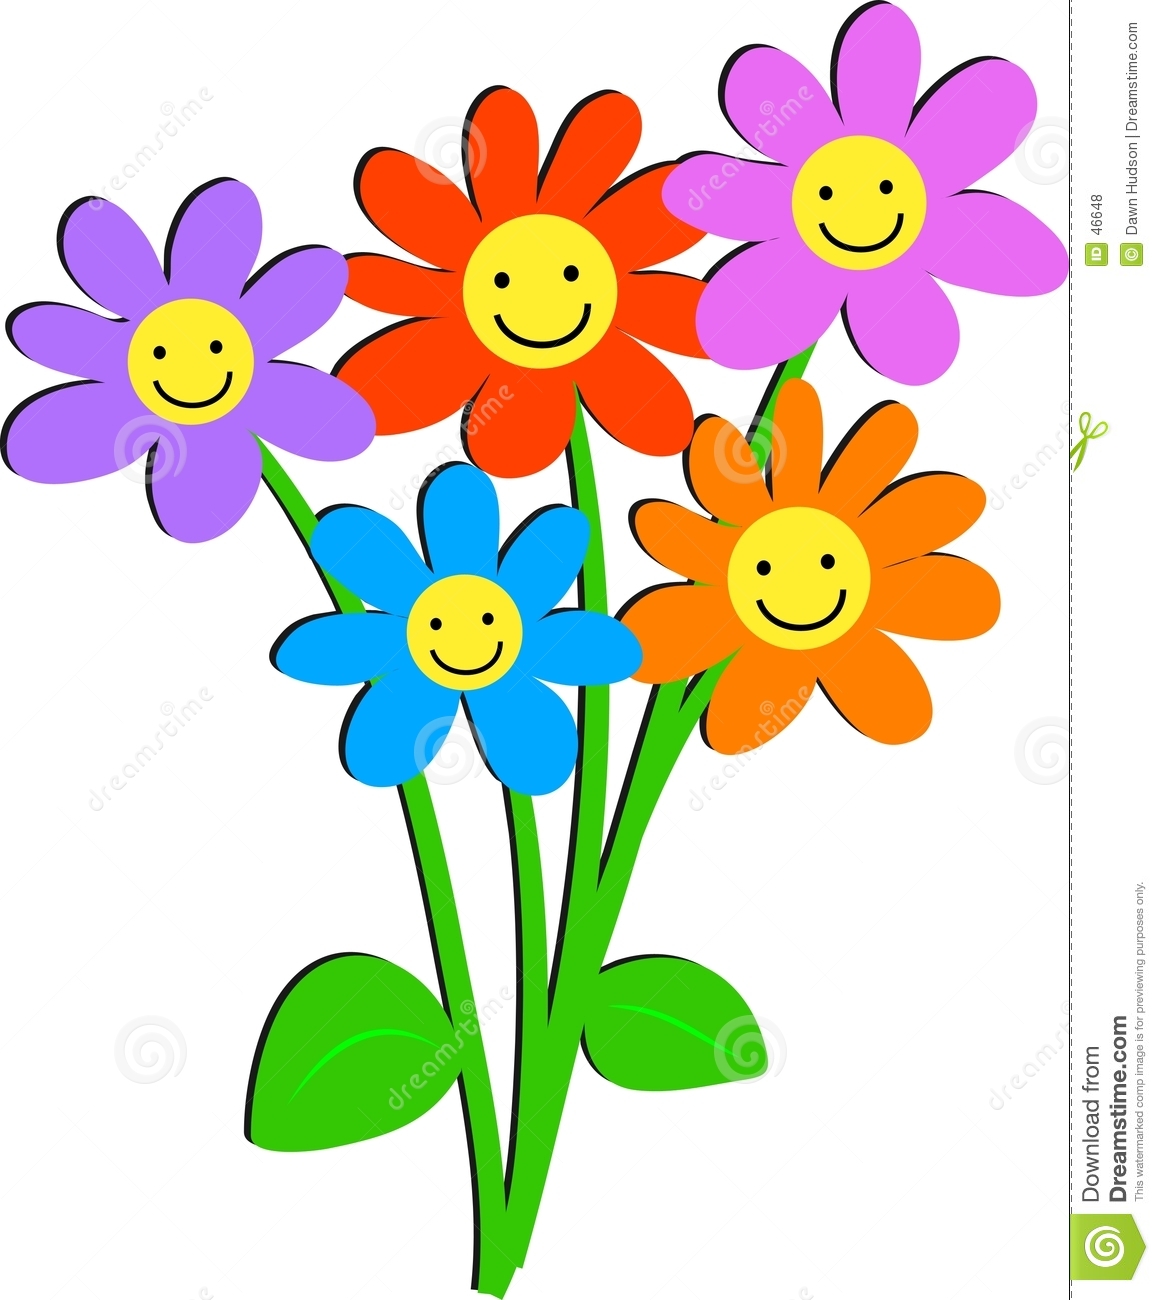 Happy Birthday Flowers Clipart   Clipart Panda   Free Clipart Images